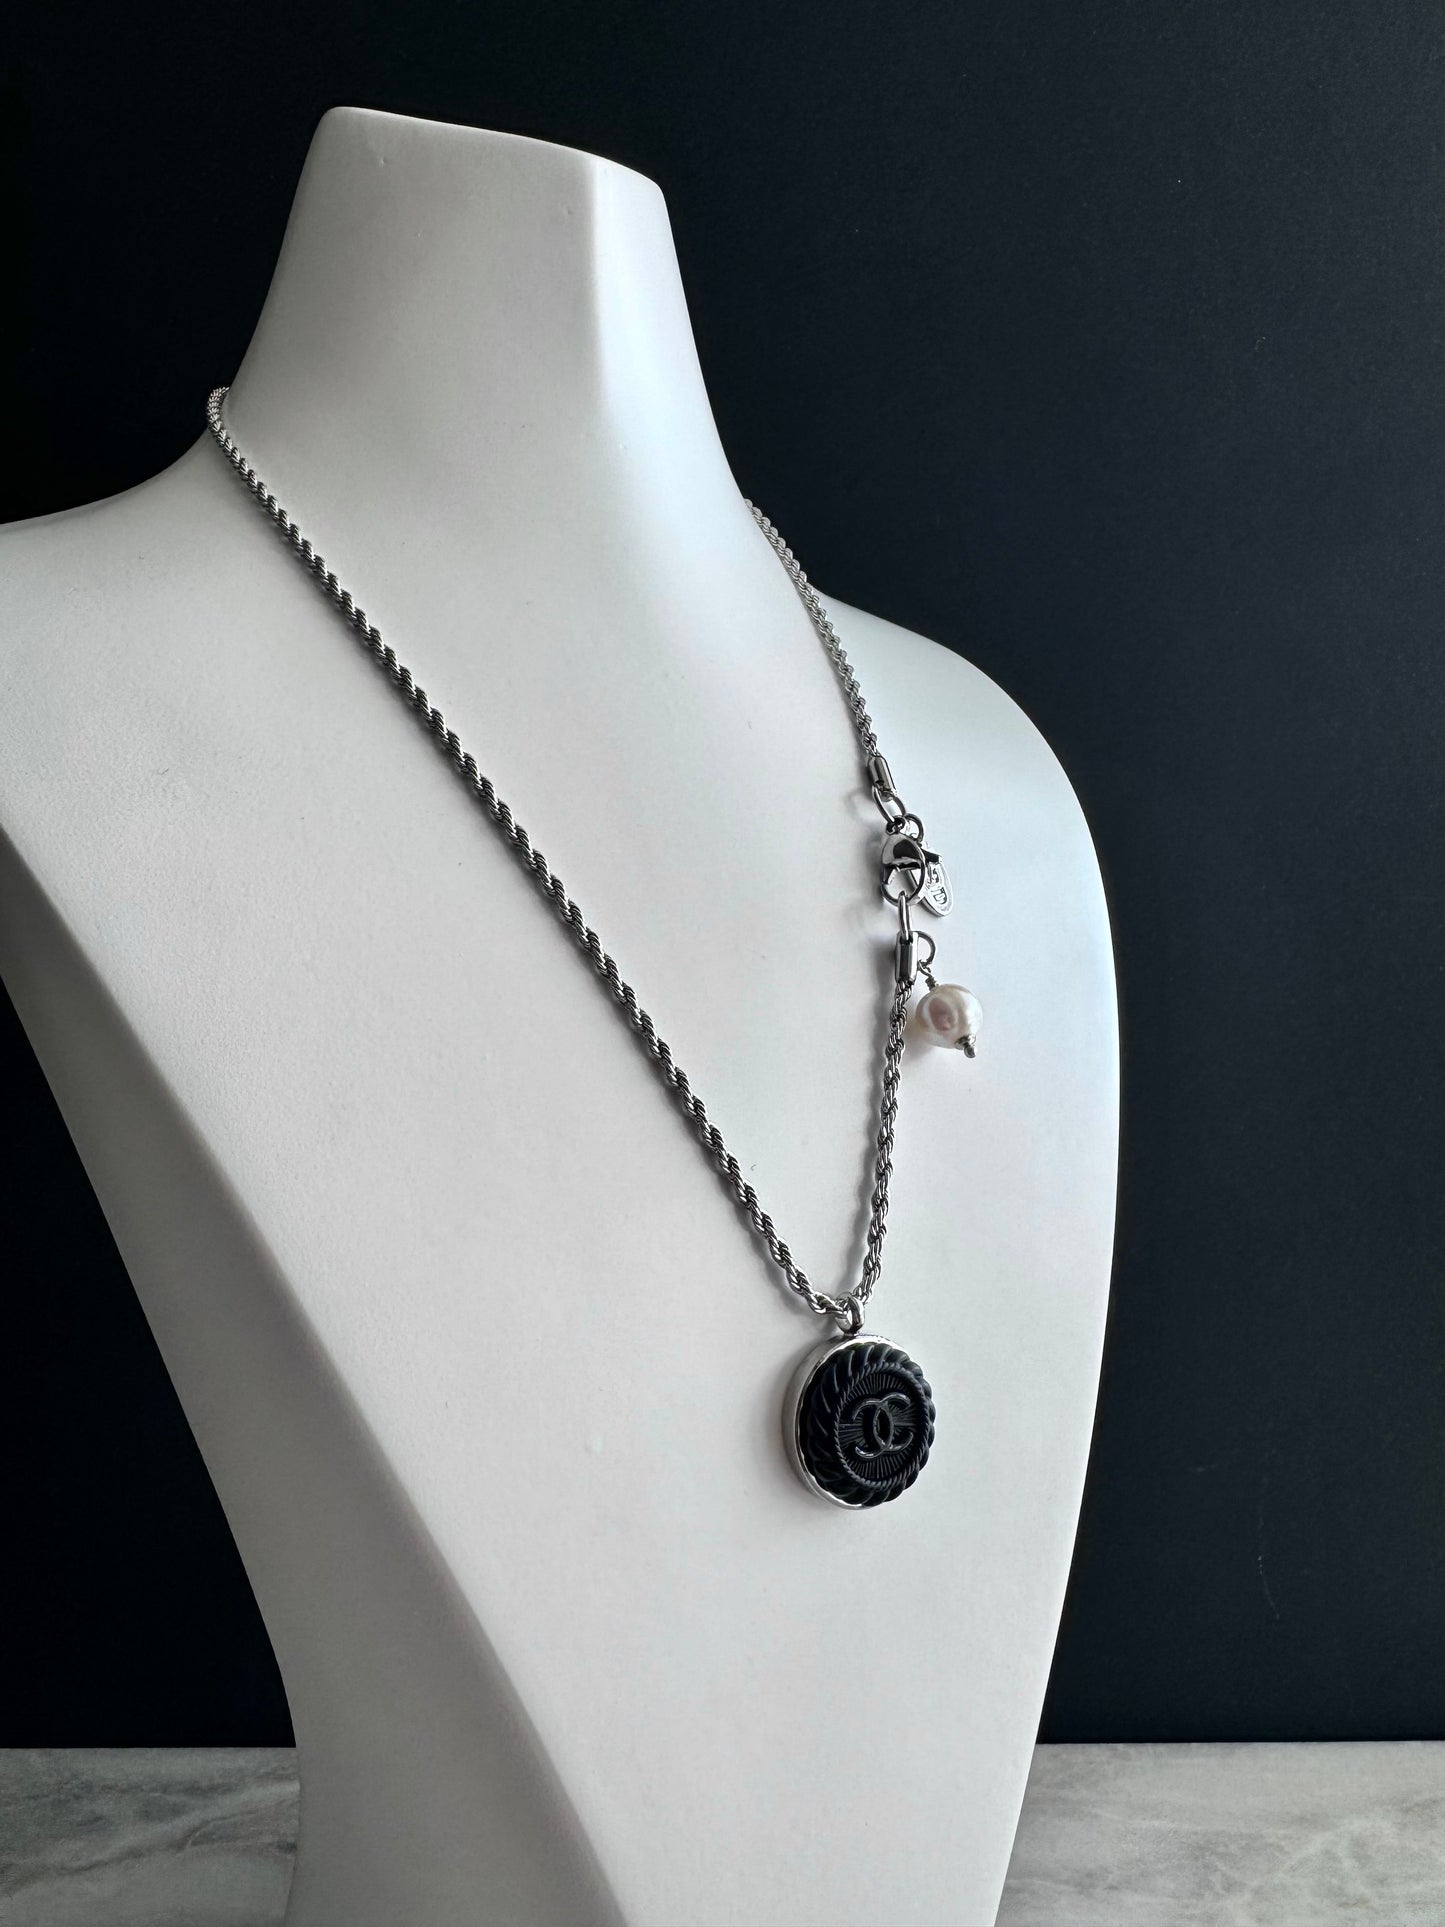 🖤 Vintage Authentic reworked silver button Necklace